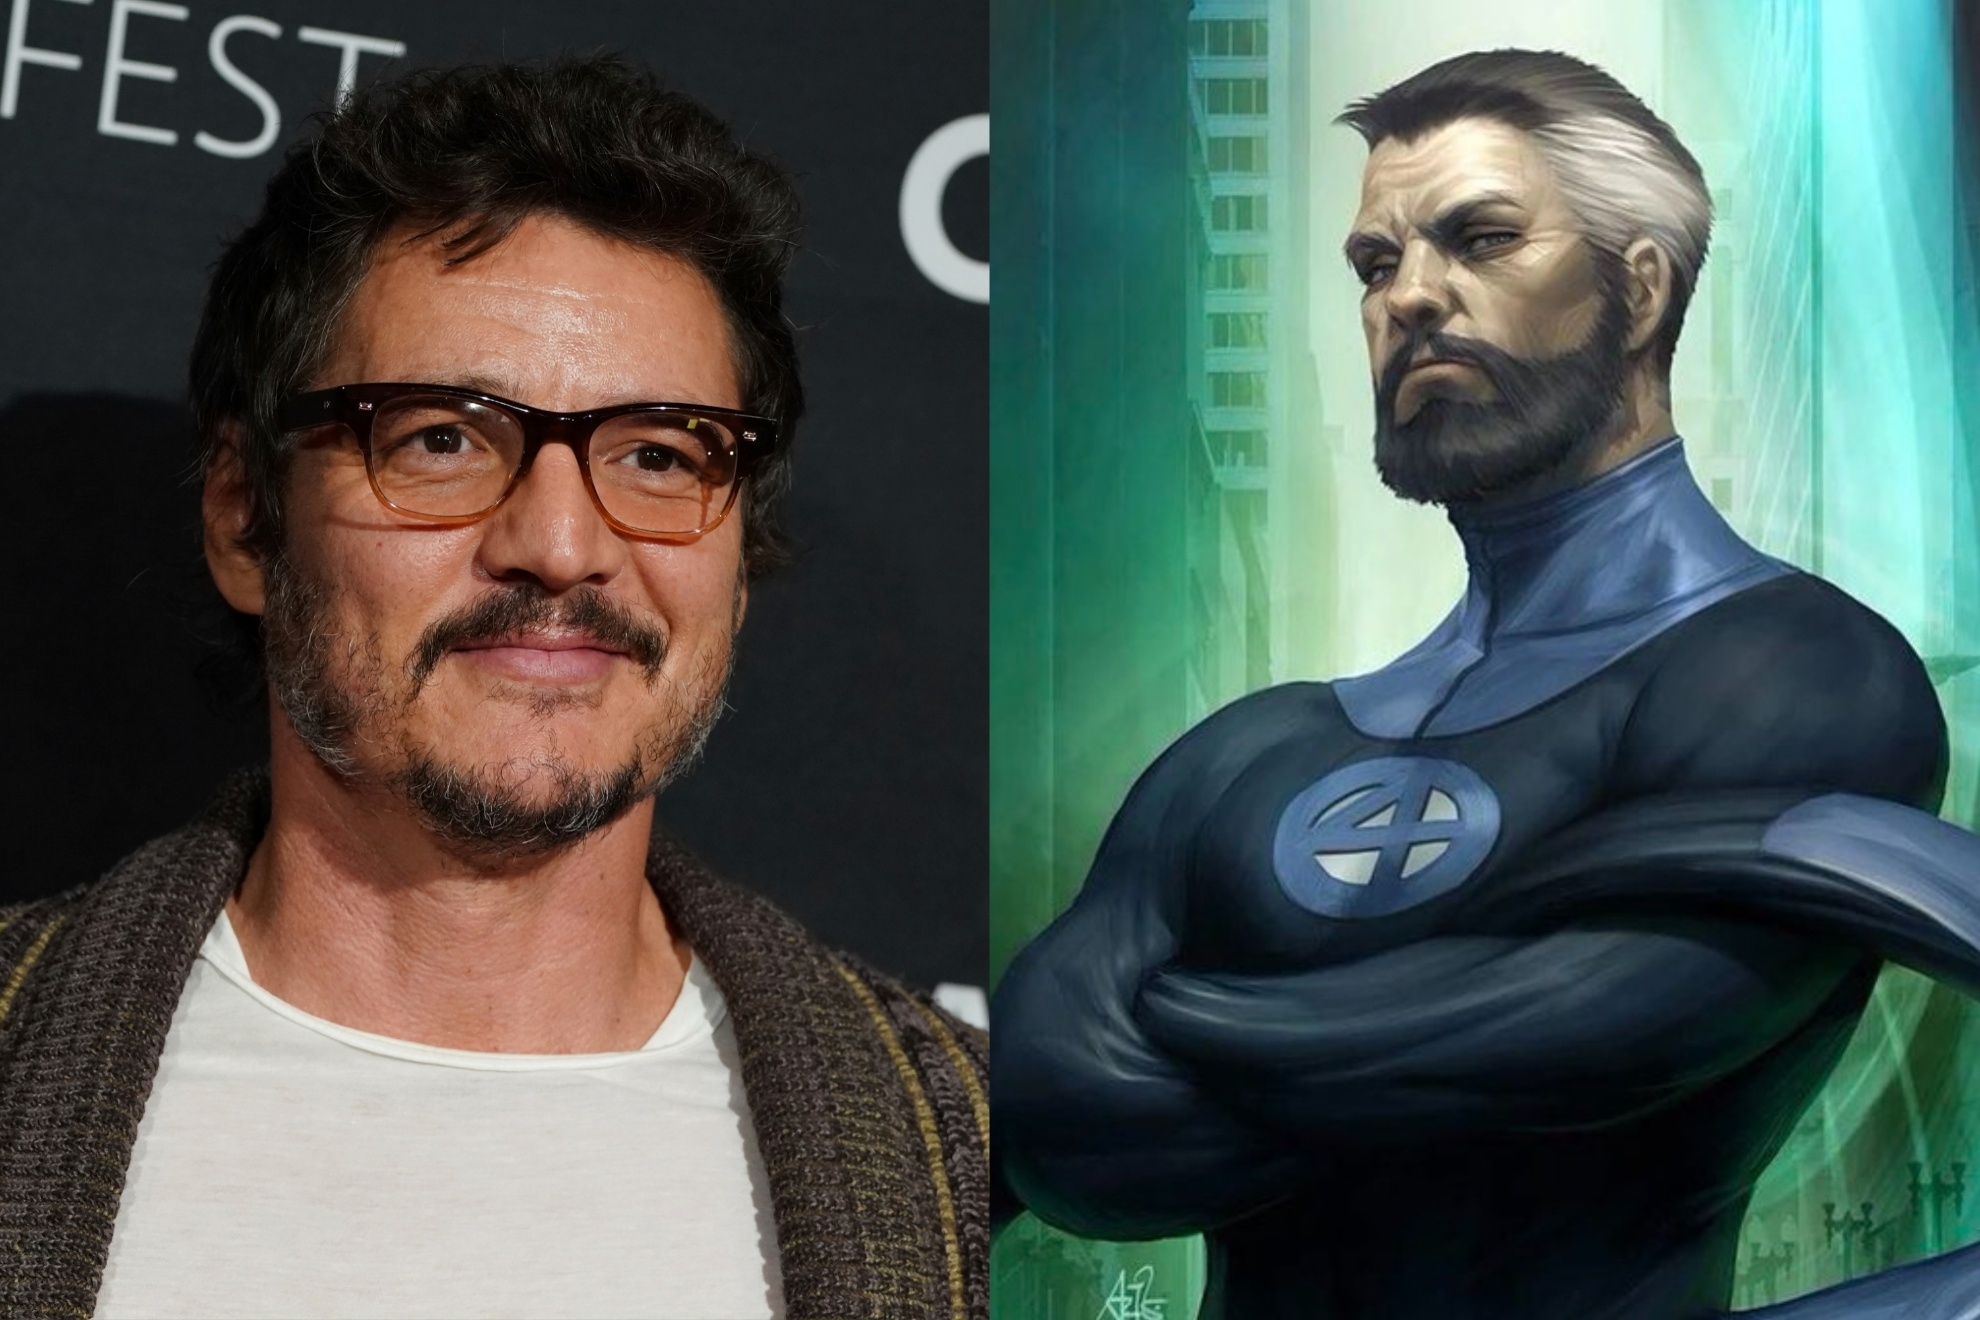 Pedro Pascal is Mr. Fantastic in the MCU